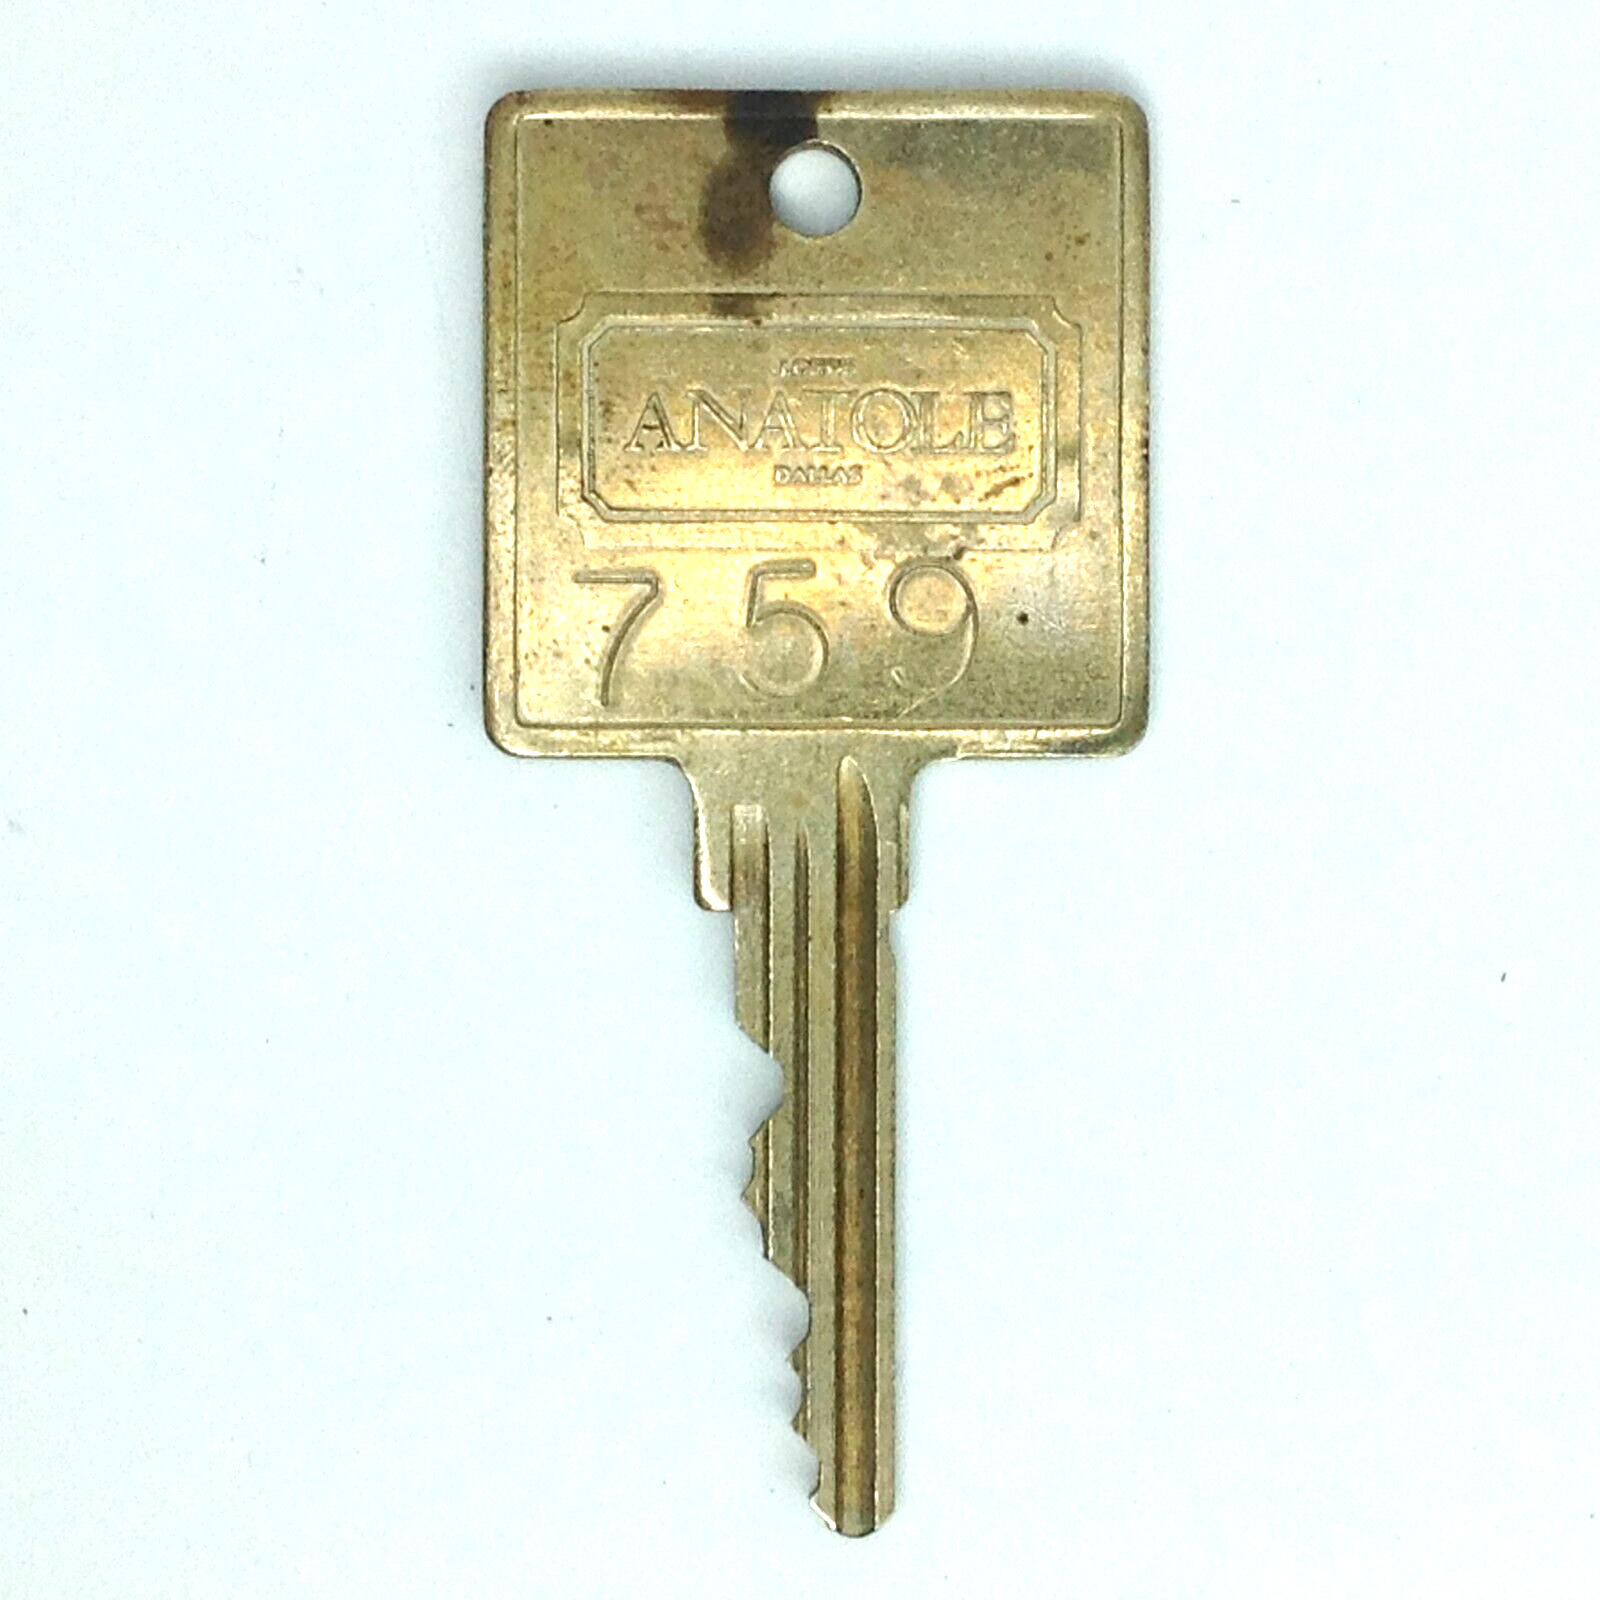 Vintage ANATOLE Dallas Brass Hotel Room Key #759 with Large Square Bow Loews